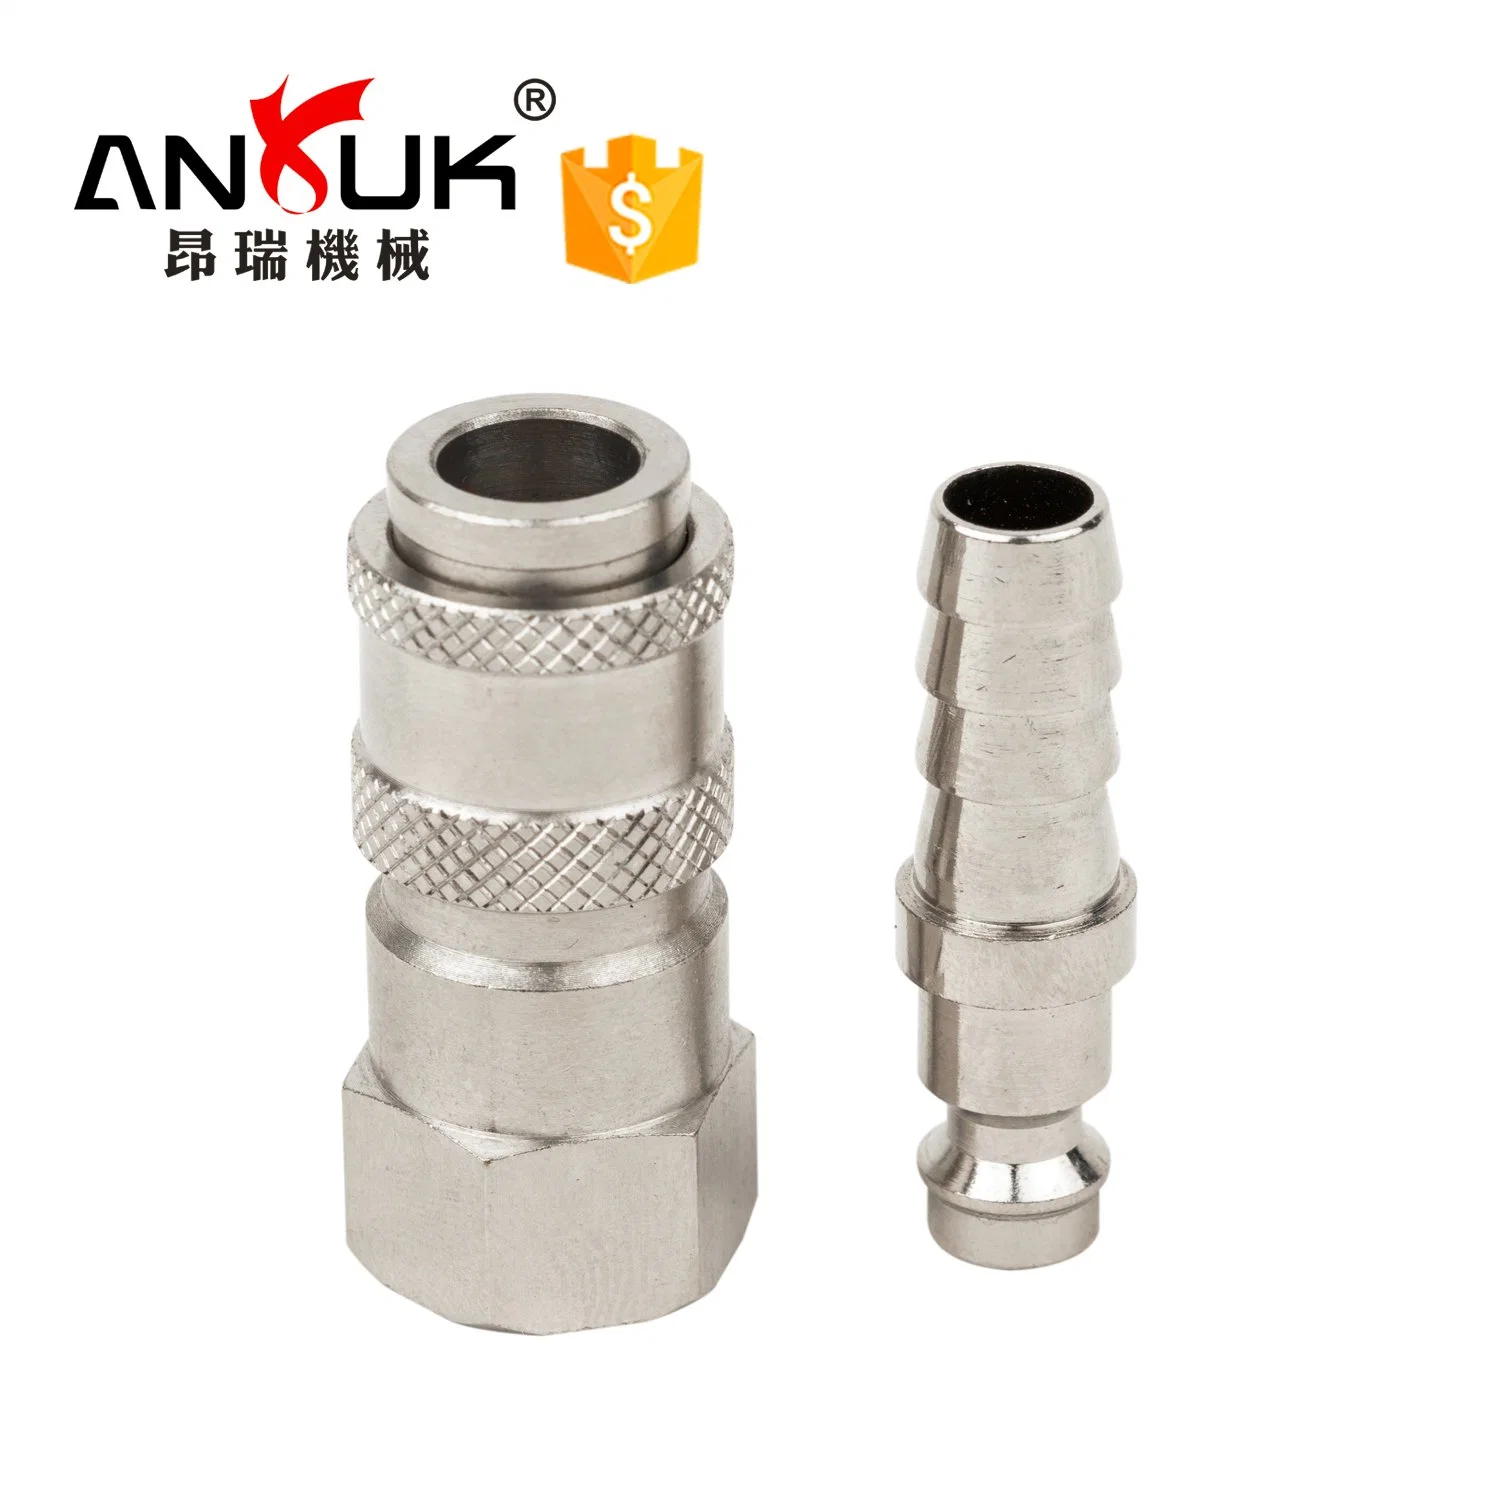 Fast One -Touch Hose Fittings Iron Quick Pneumatic Disconnect Coupling for 4mm-35mm